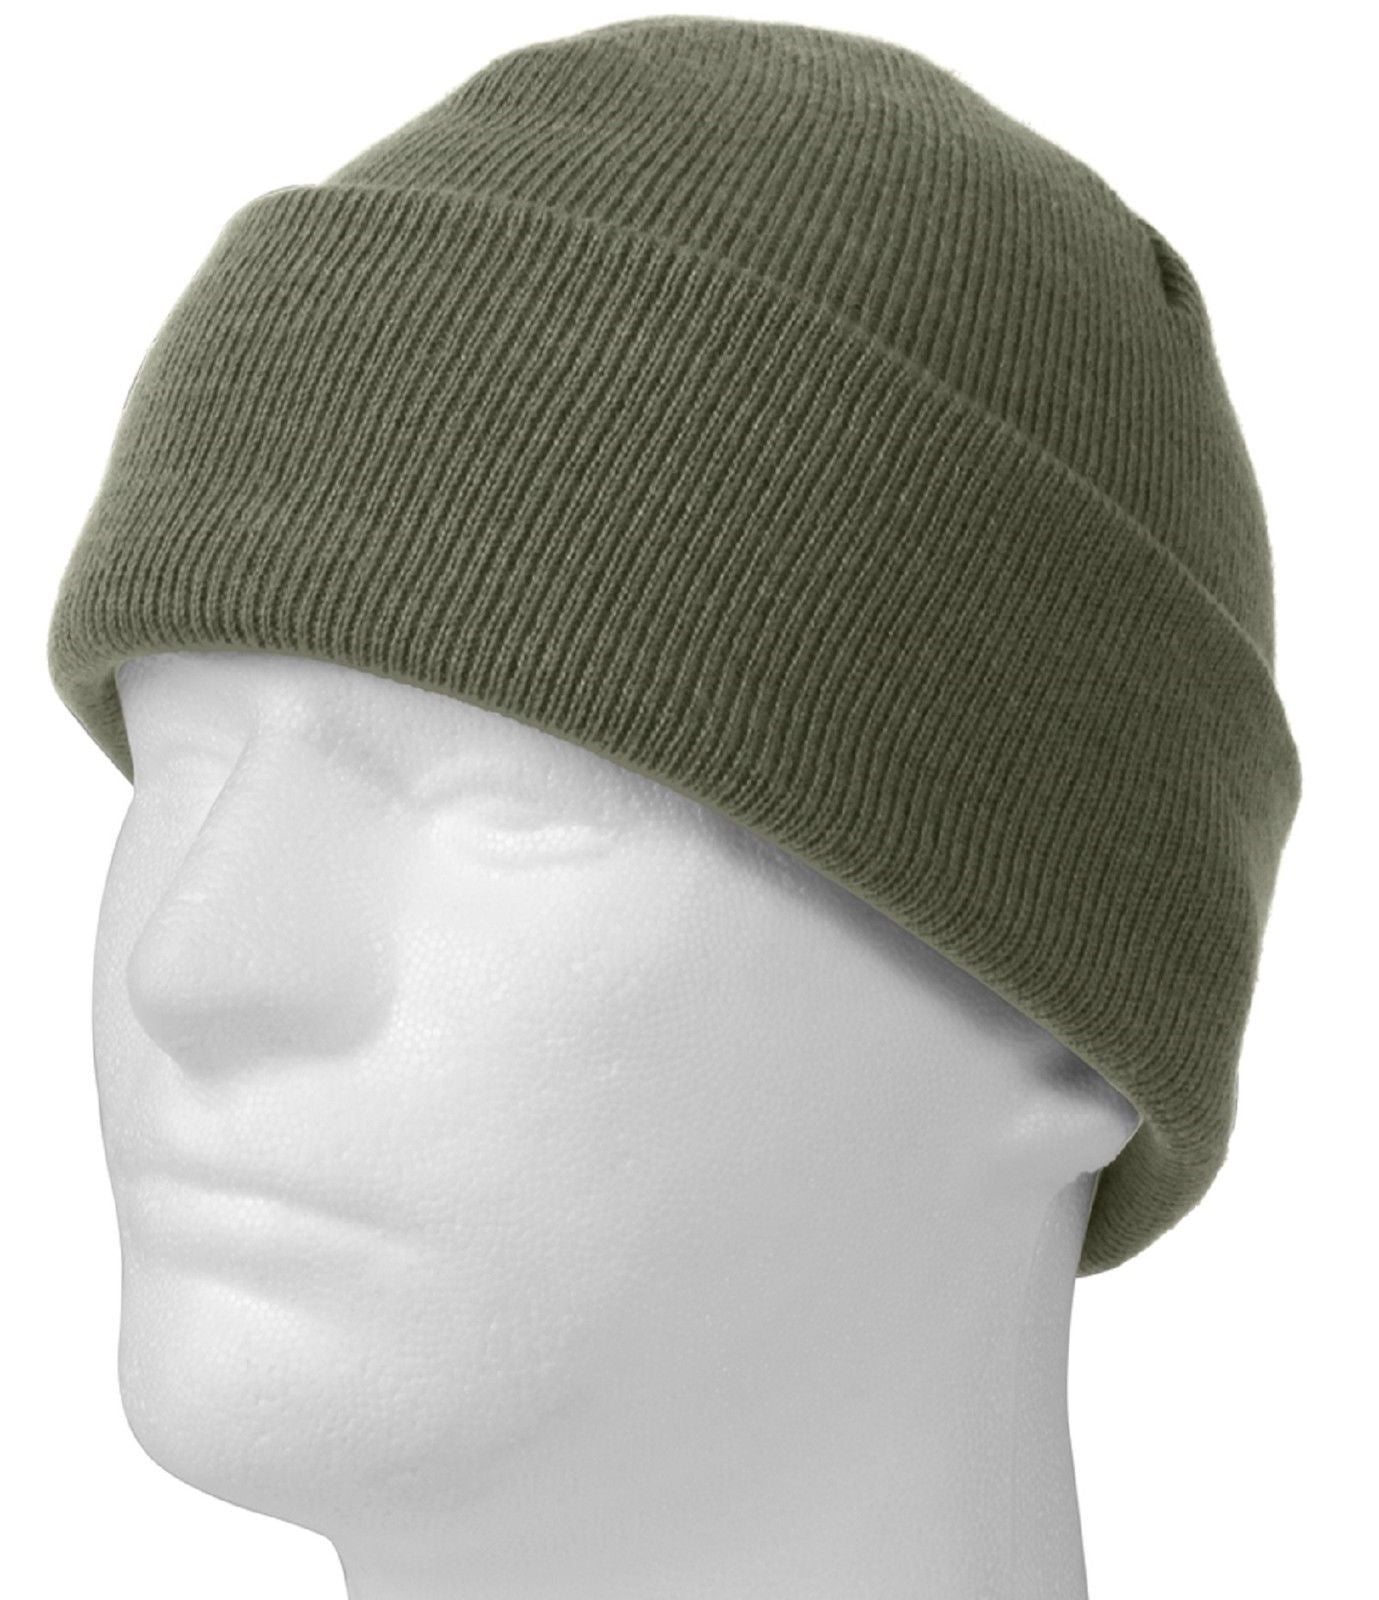 Foliage Green Deluxe Fine Knit Winter Watch Cap - Rothco Acrylic Snow ...